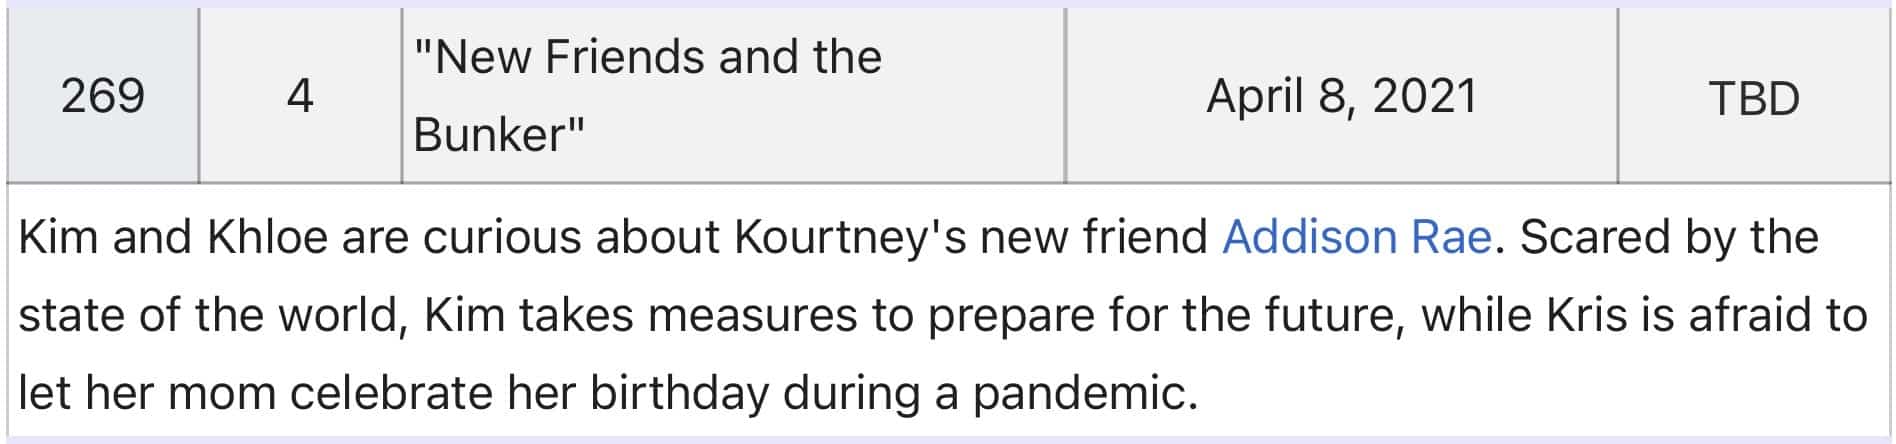 Description for an episode of Keeping Up With The Kardashians featuring Addison Rae